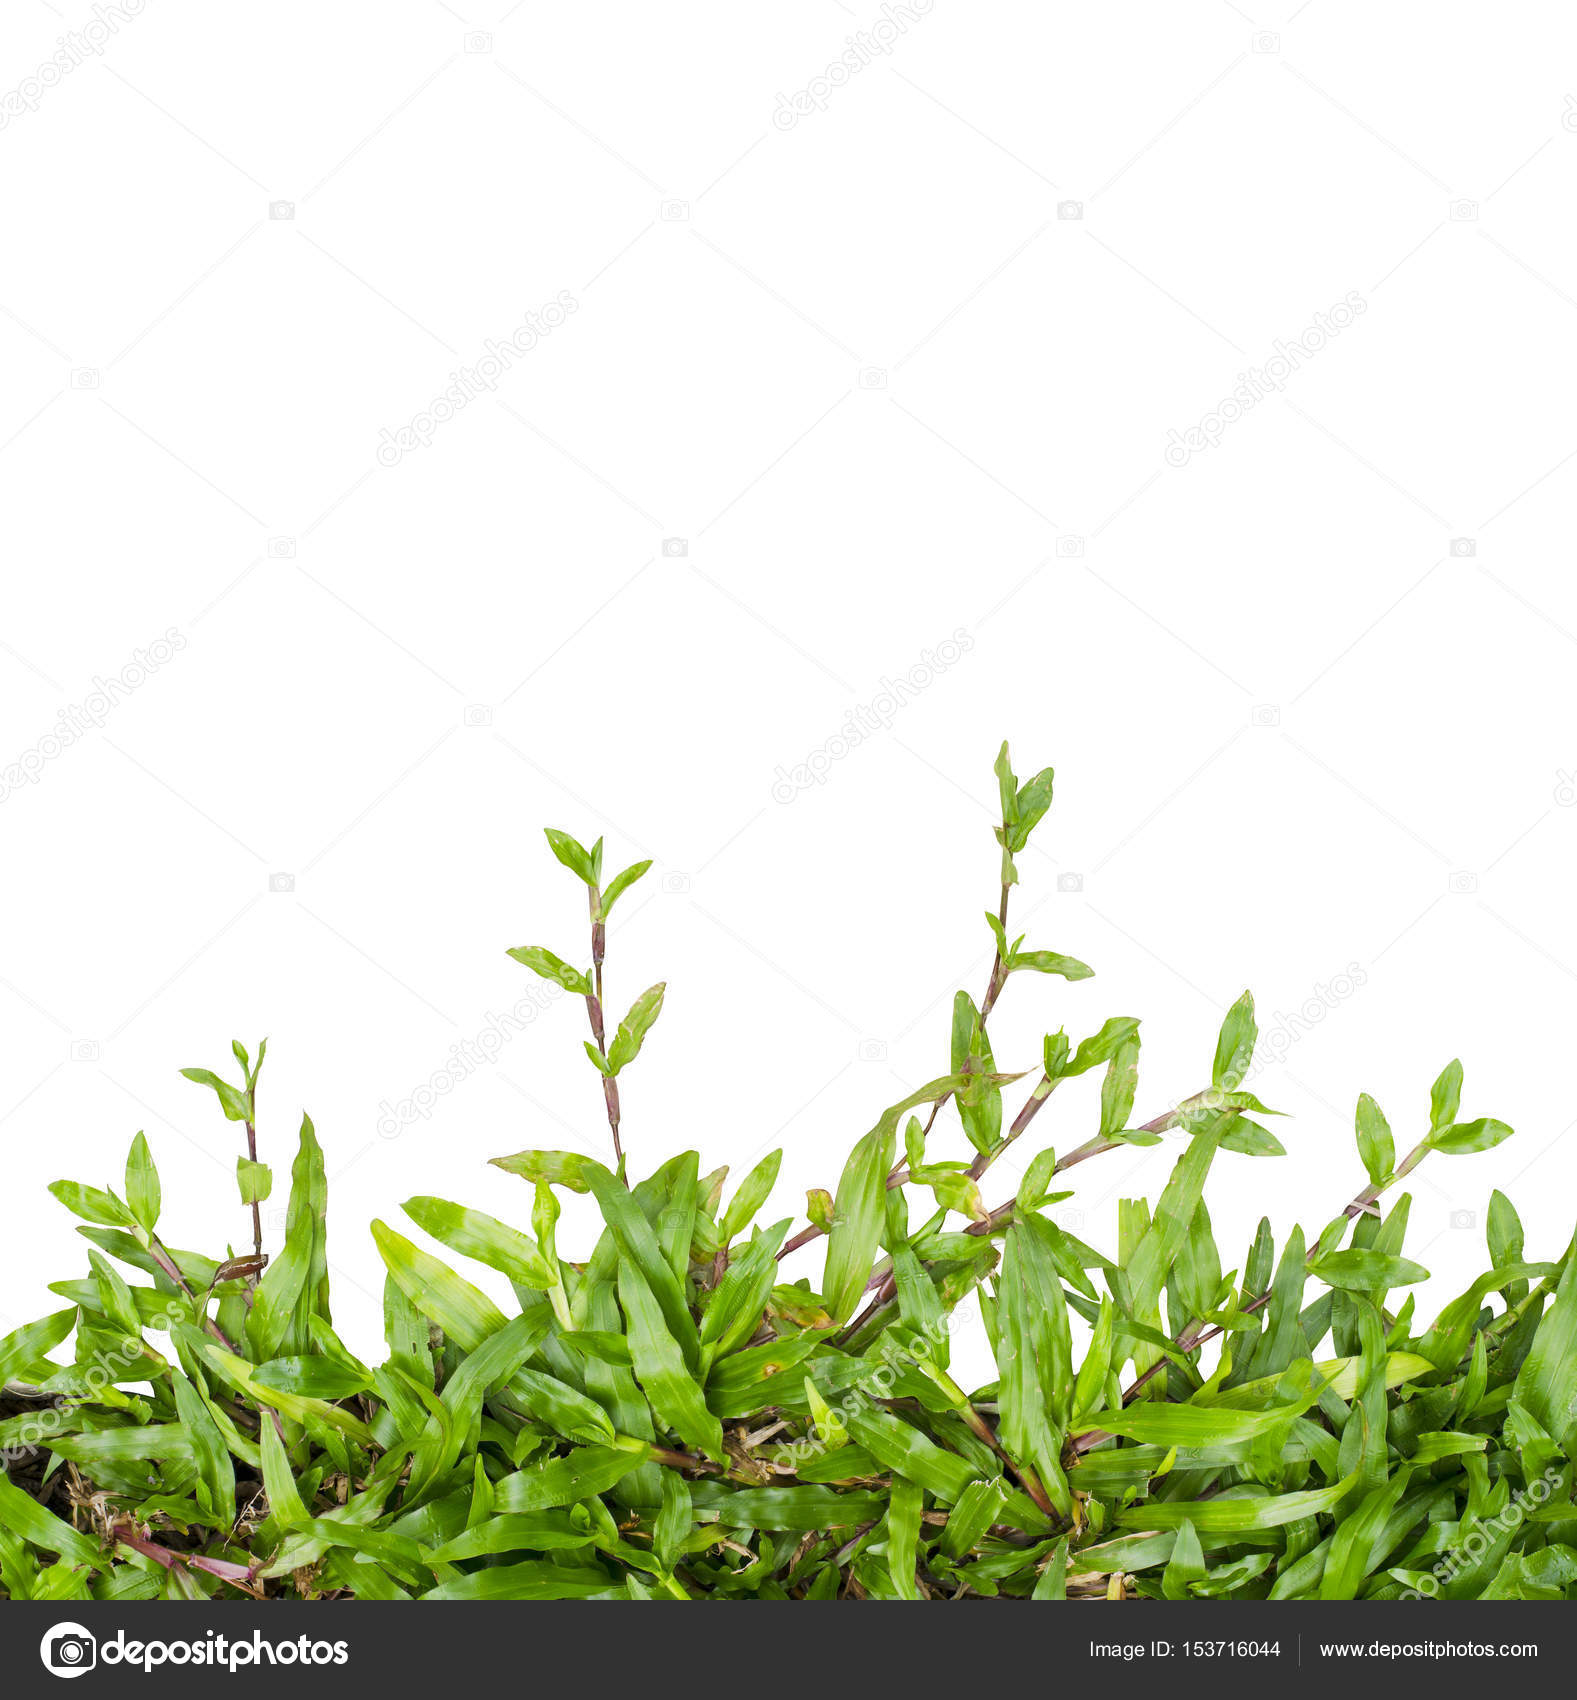 Green grass Ivy isolated — Stock Photo © phochi #153716044